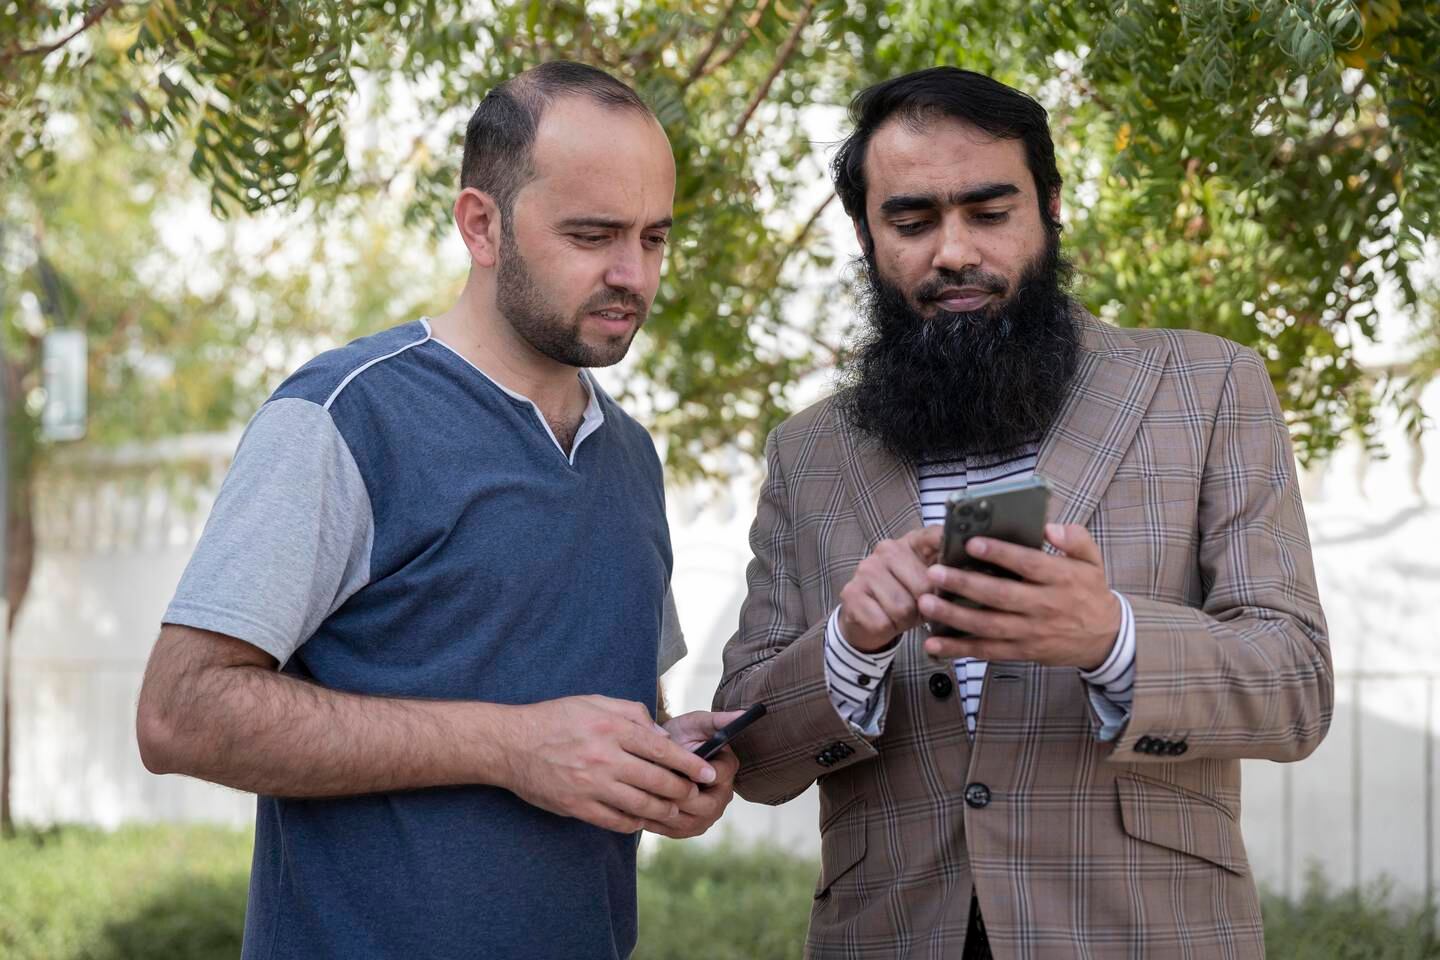 Indian software expert Abu Muadh, right, launched an app in Dubai to help workers such as Abdul Qadeer, from Pakistan, learn English and other skills to open up work opportunities. Antonie Robertson / The National